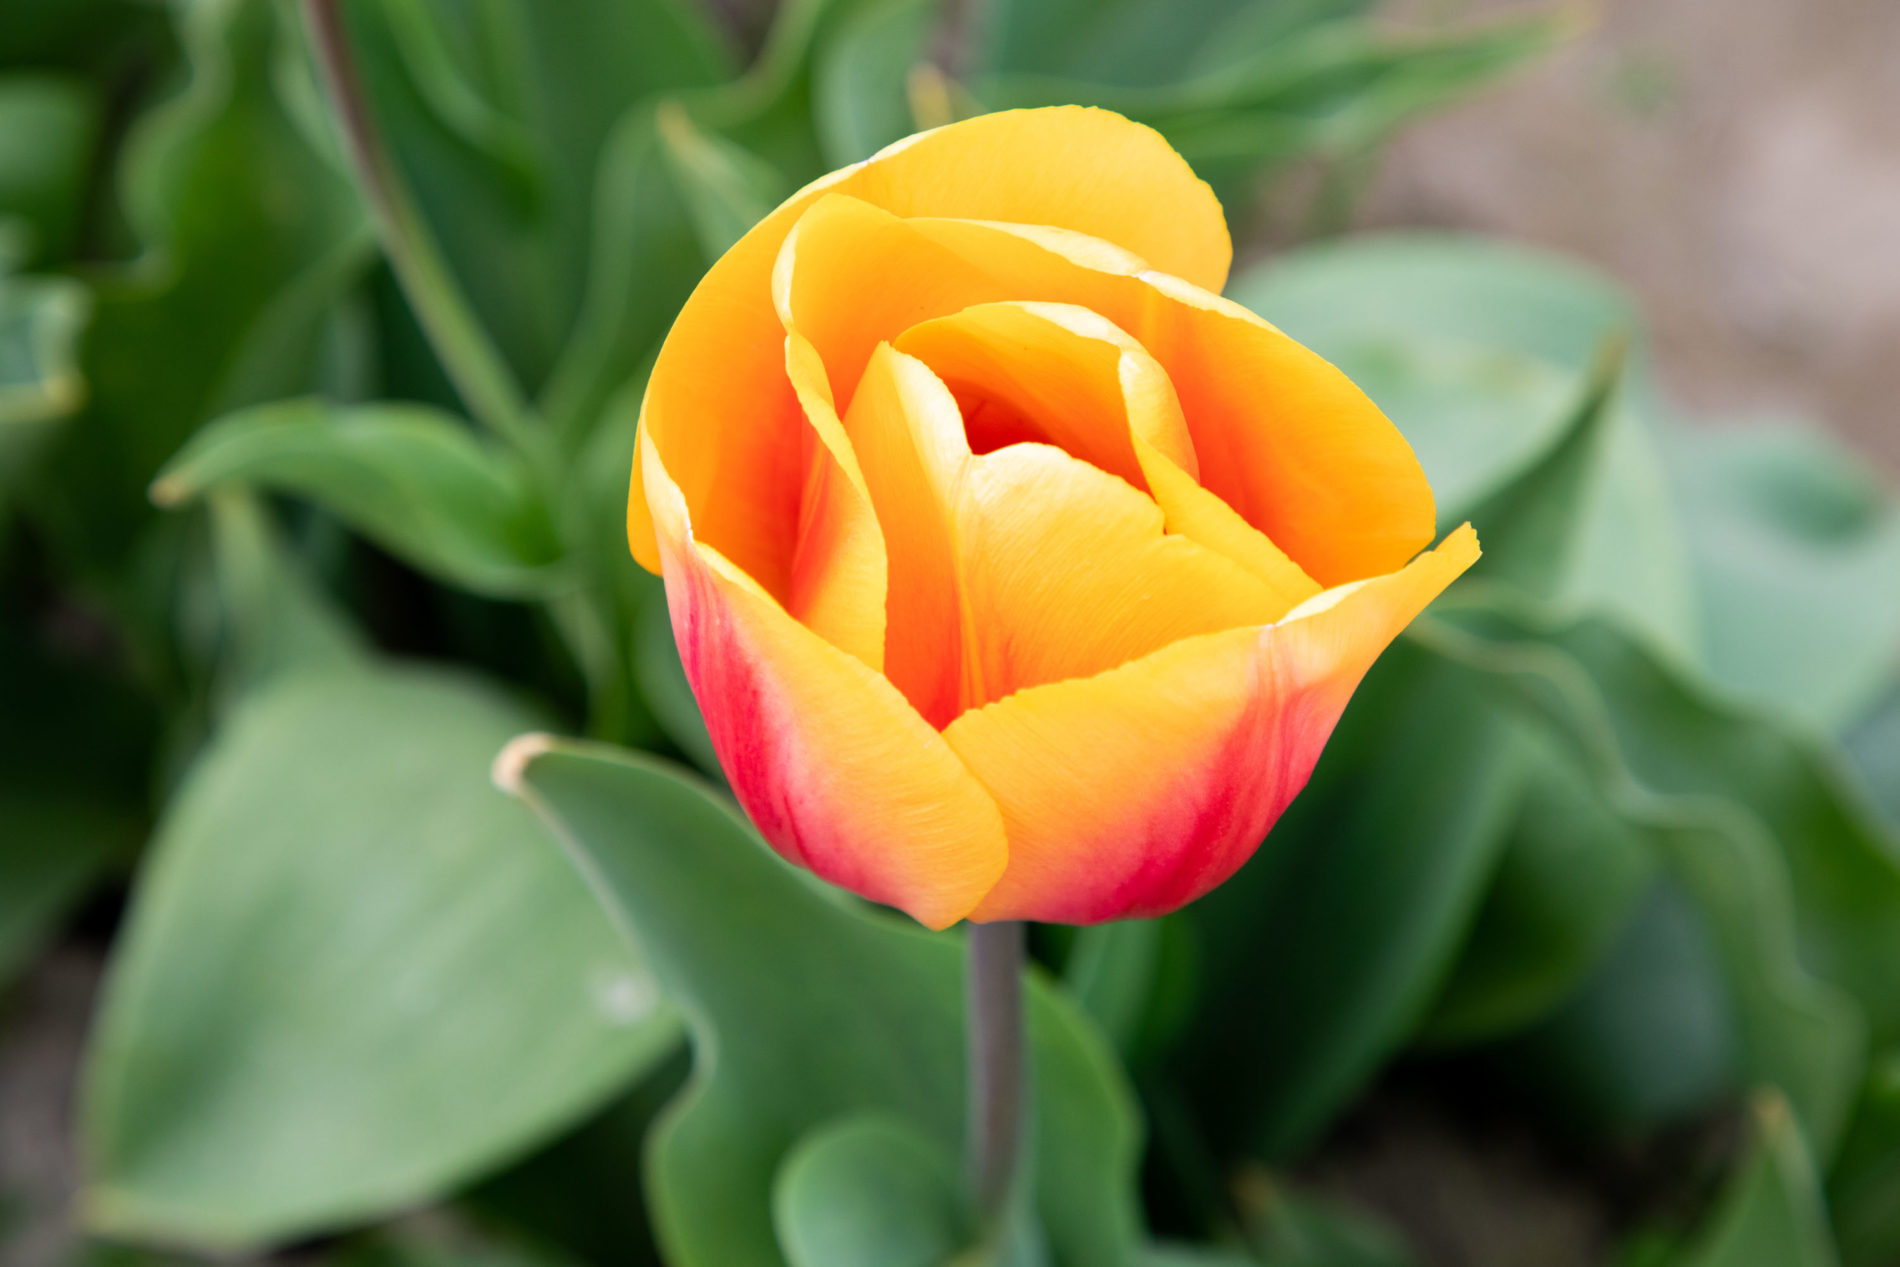 A yellow and red tulip.